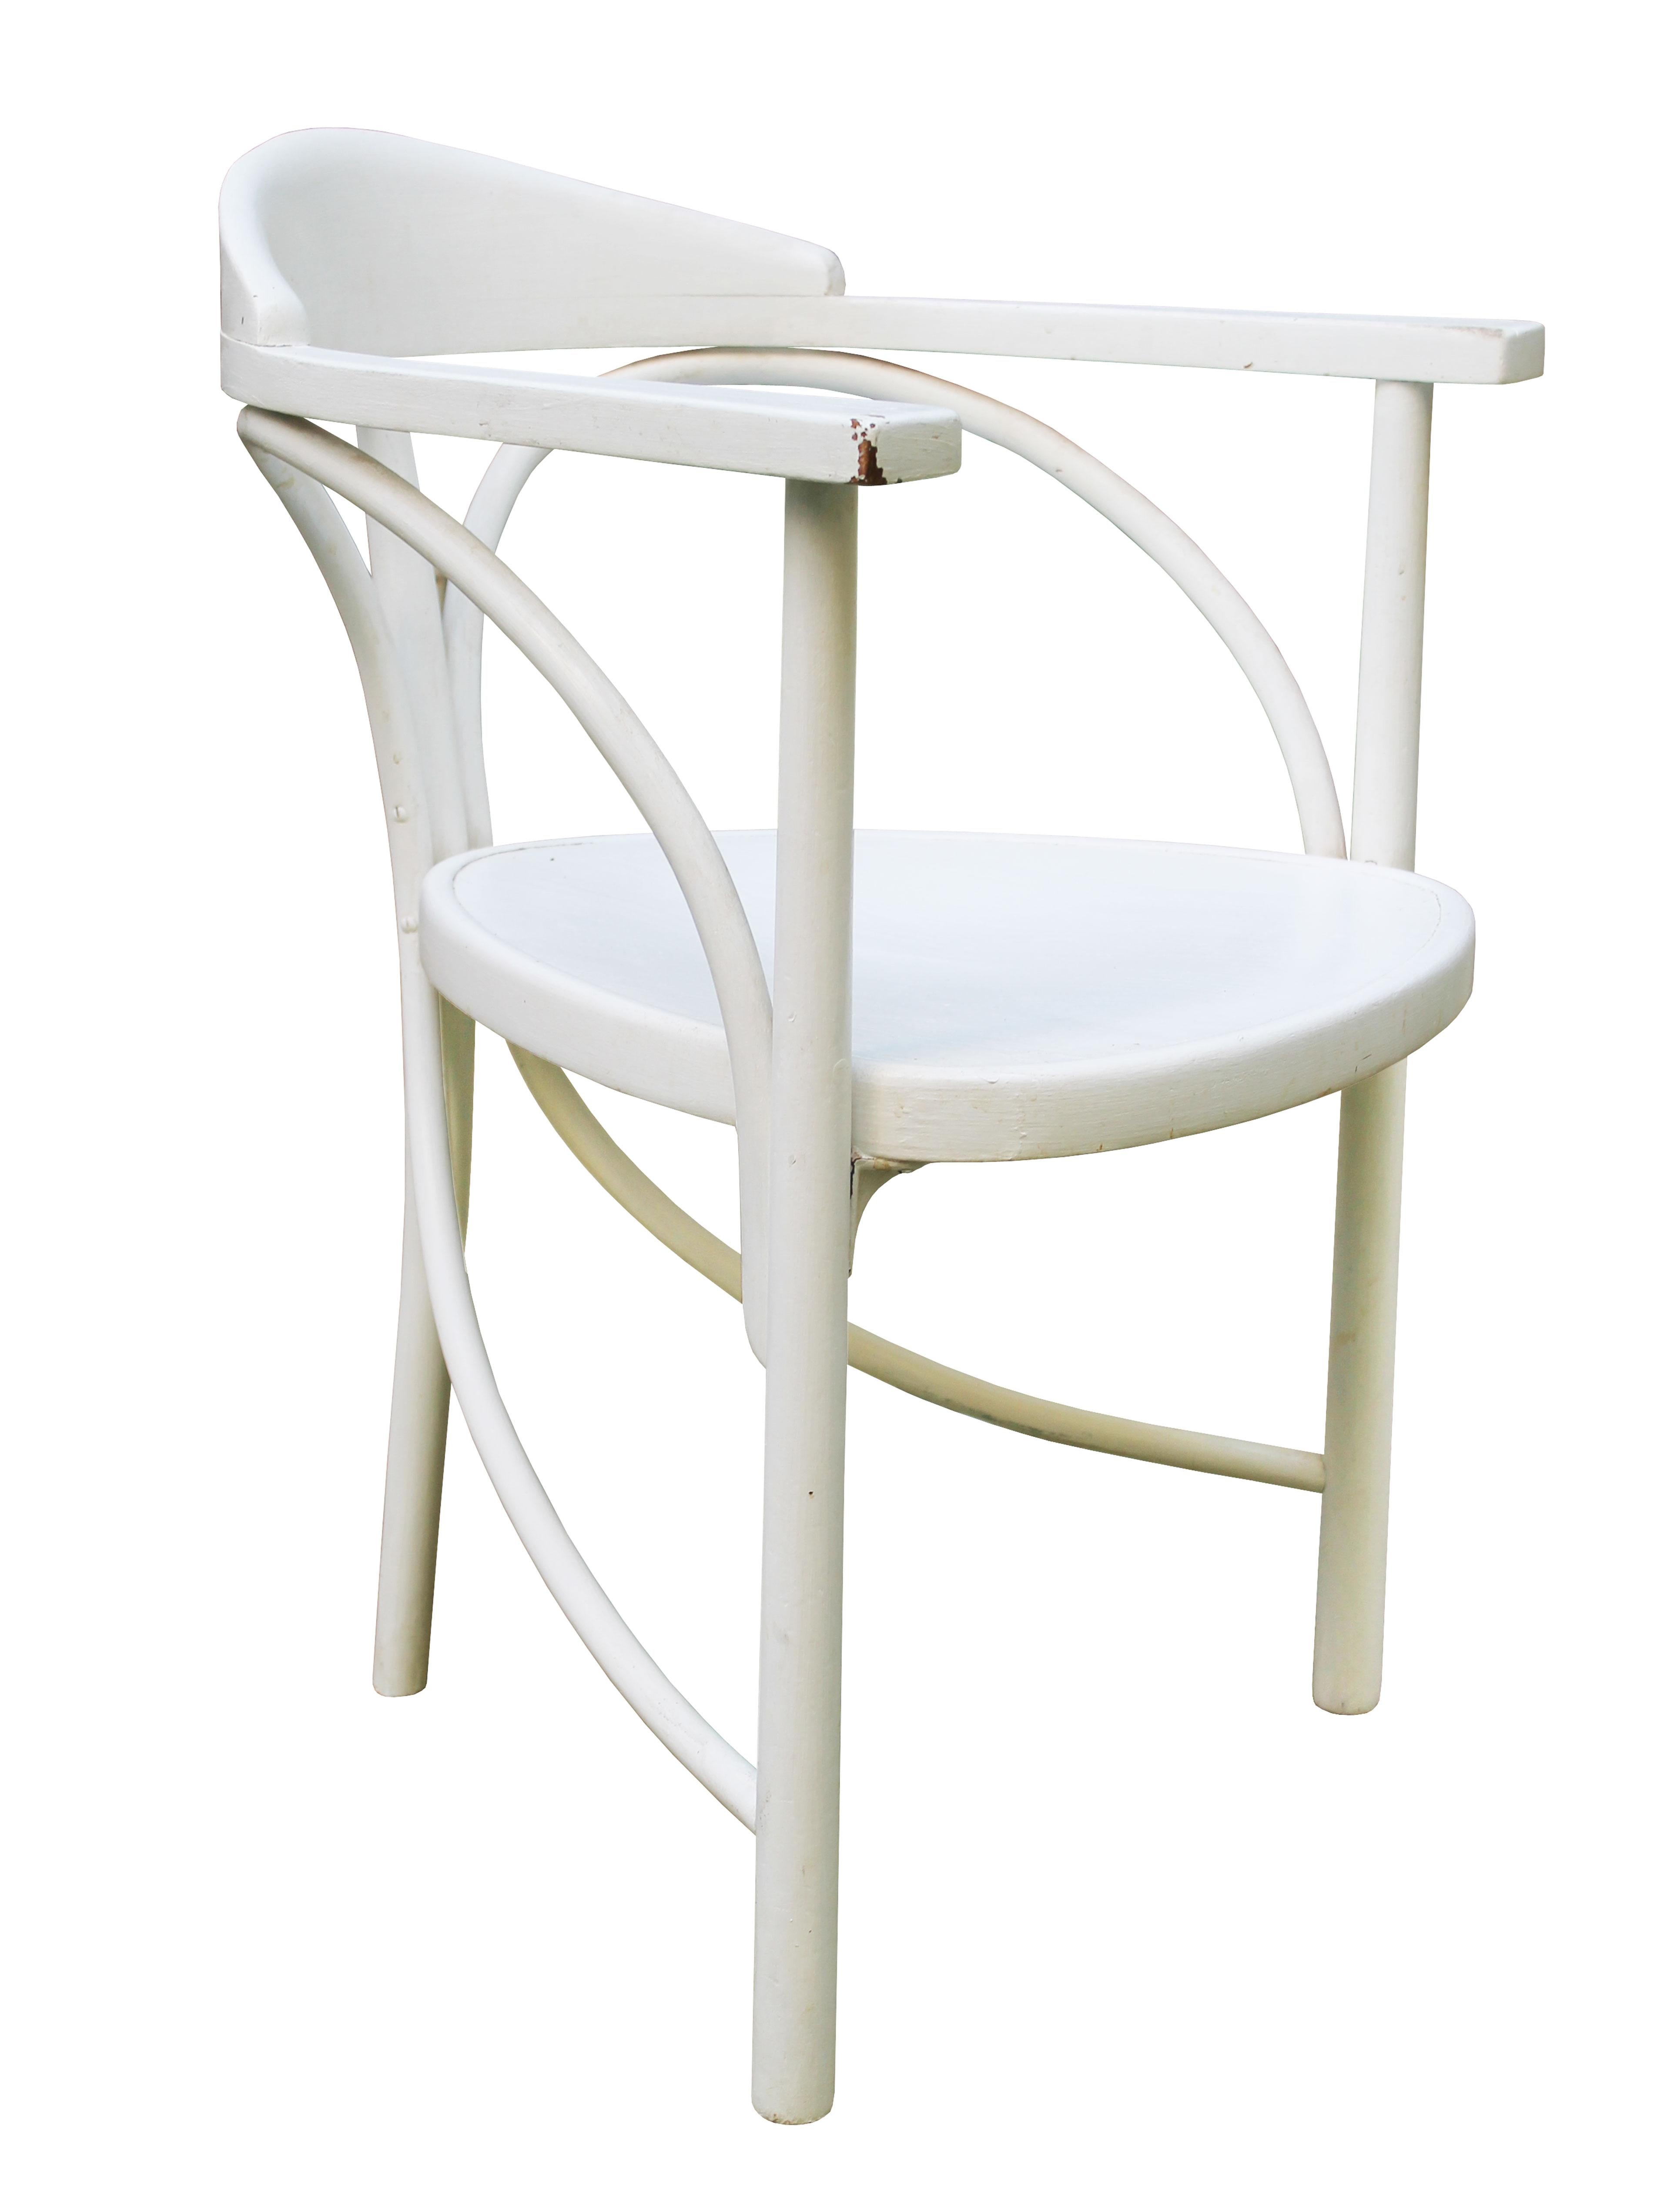 This rare Thonet Art Nouveau tripod chair was designed in 1904, and in the Thonet catalogue of 1906 (see image below) it is depicted as 